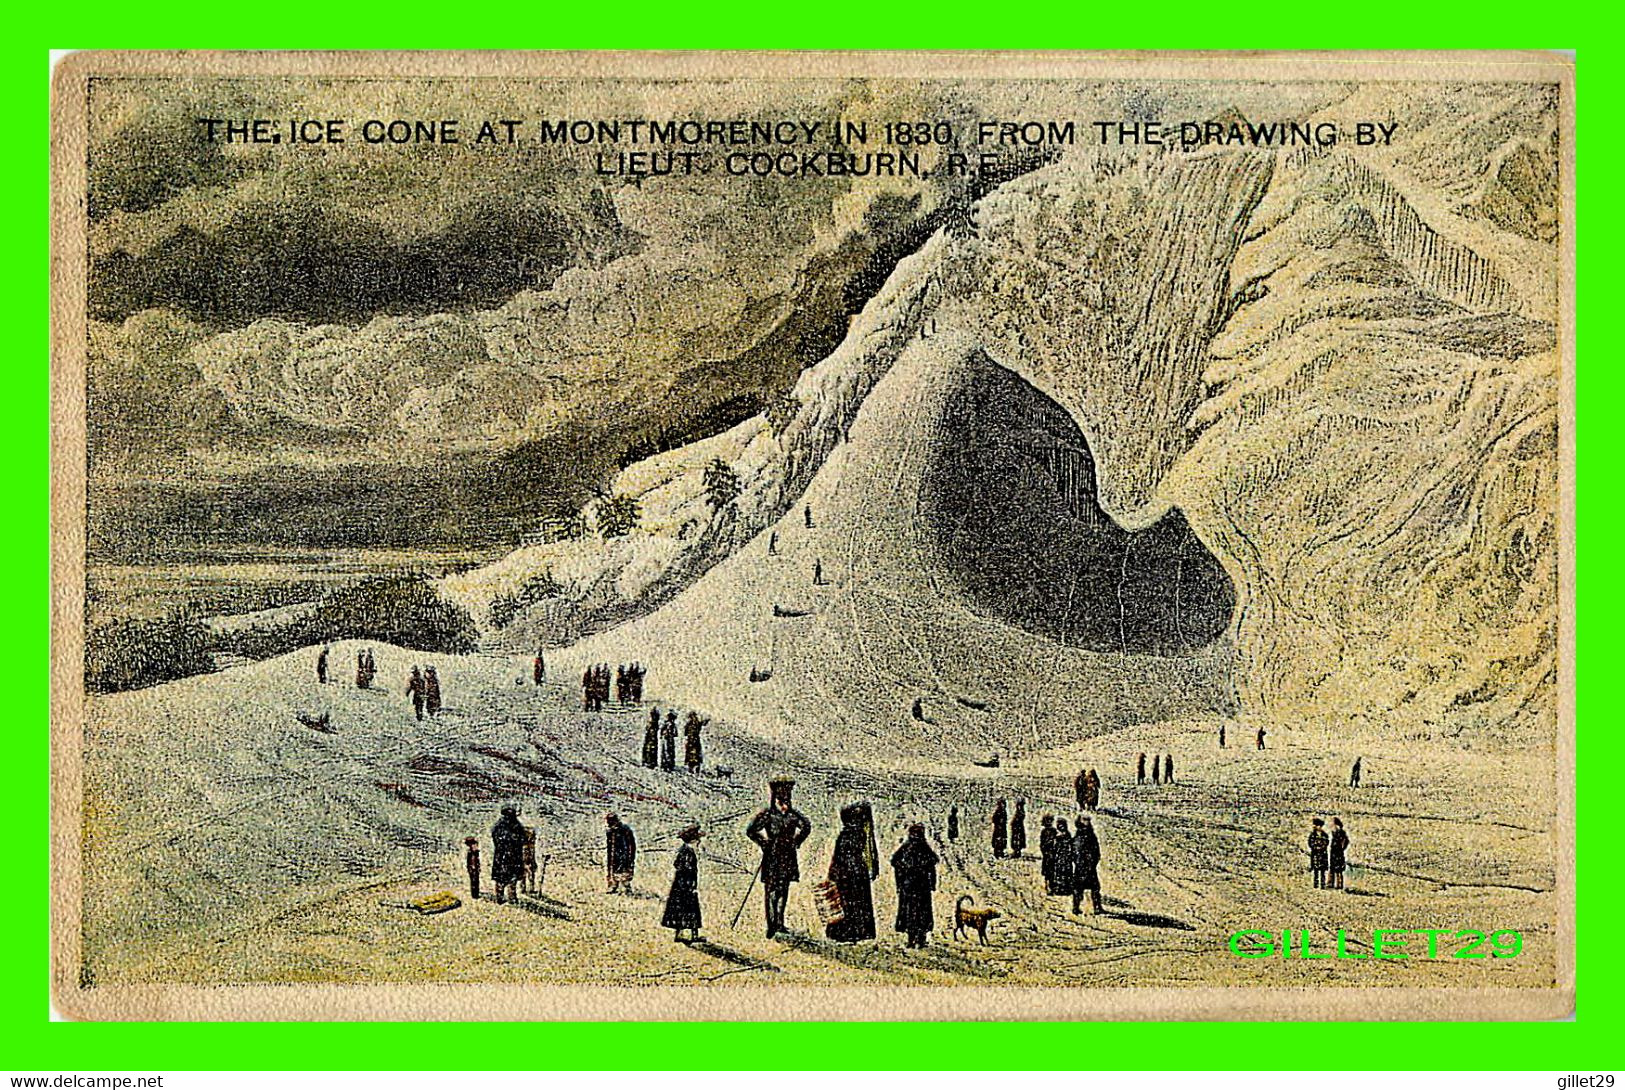 MONTMORENCY, QUÉBEC - THE ICE CONE AT MONTMORENCY IN 1830 FROM THE DRAWING BY LIEUT. COCKBURN, R.E. - MORTIMER CO - - Cataratas De Montmorency